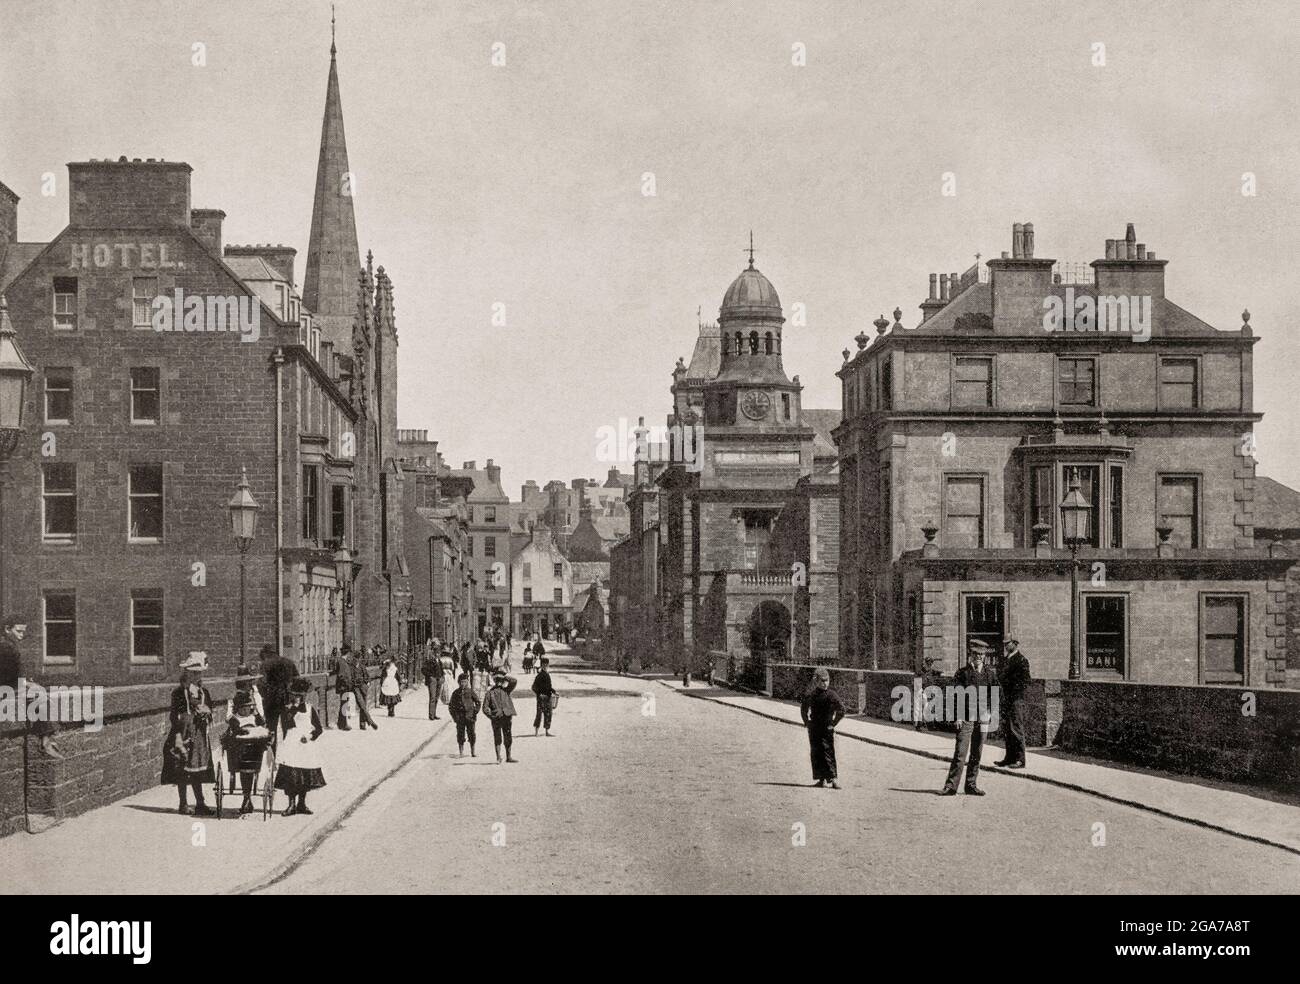 A late 19th century view of Bridge Street in Wick, a town and royal burgh in Caithness, in the far north of Scotland. The town straddles the River Wick and extends along both sides of Wick Bay. Stock Photo